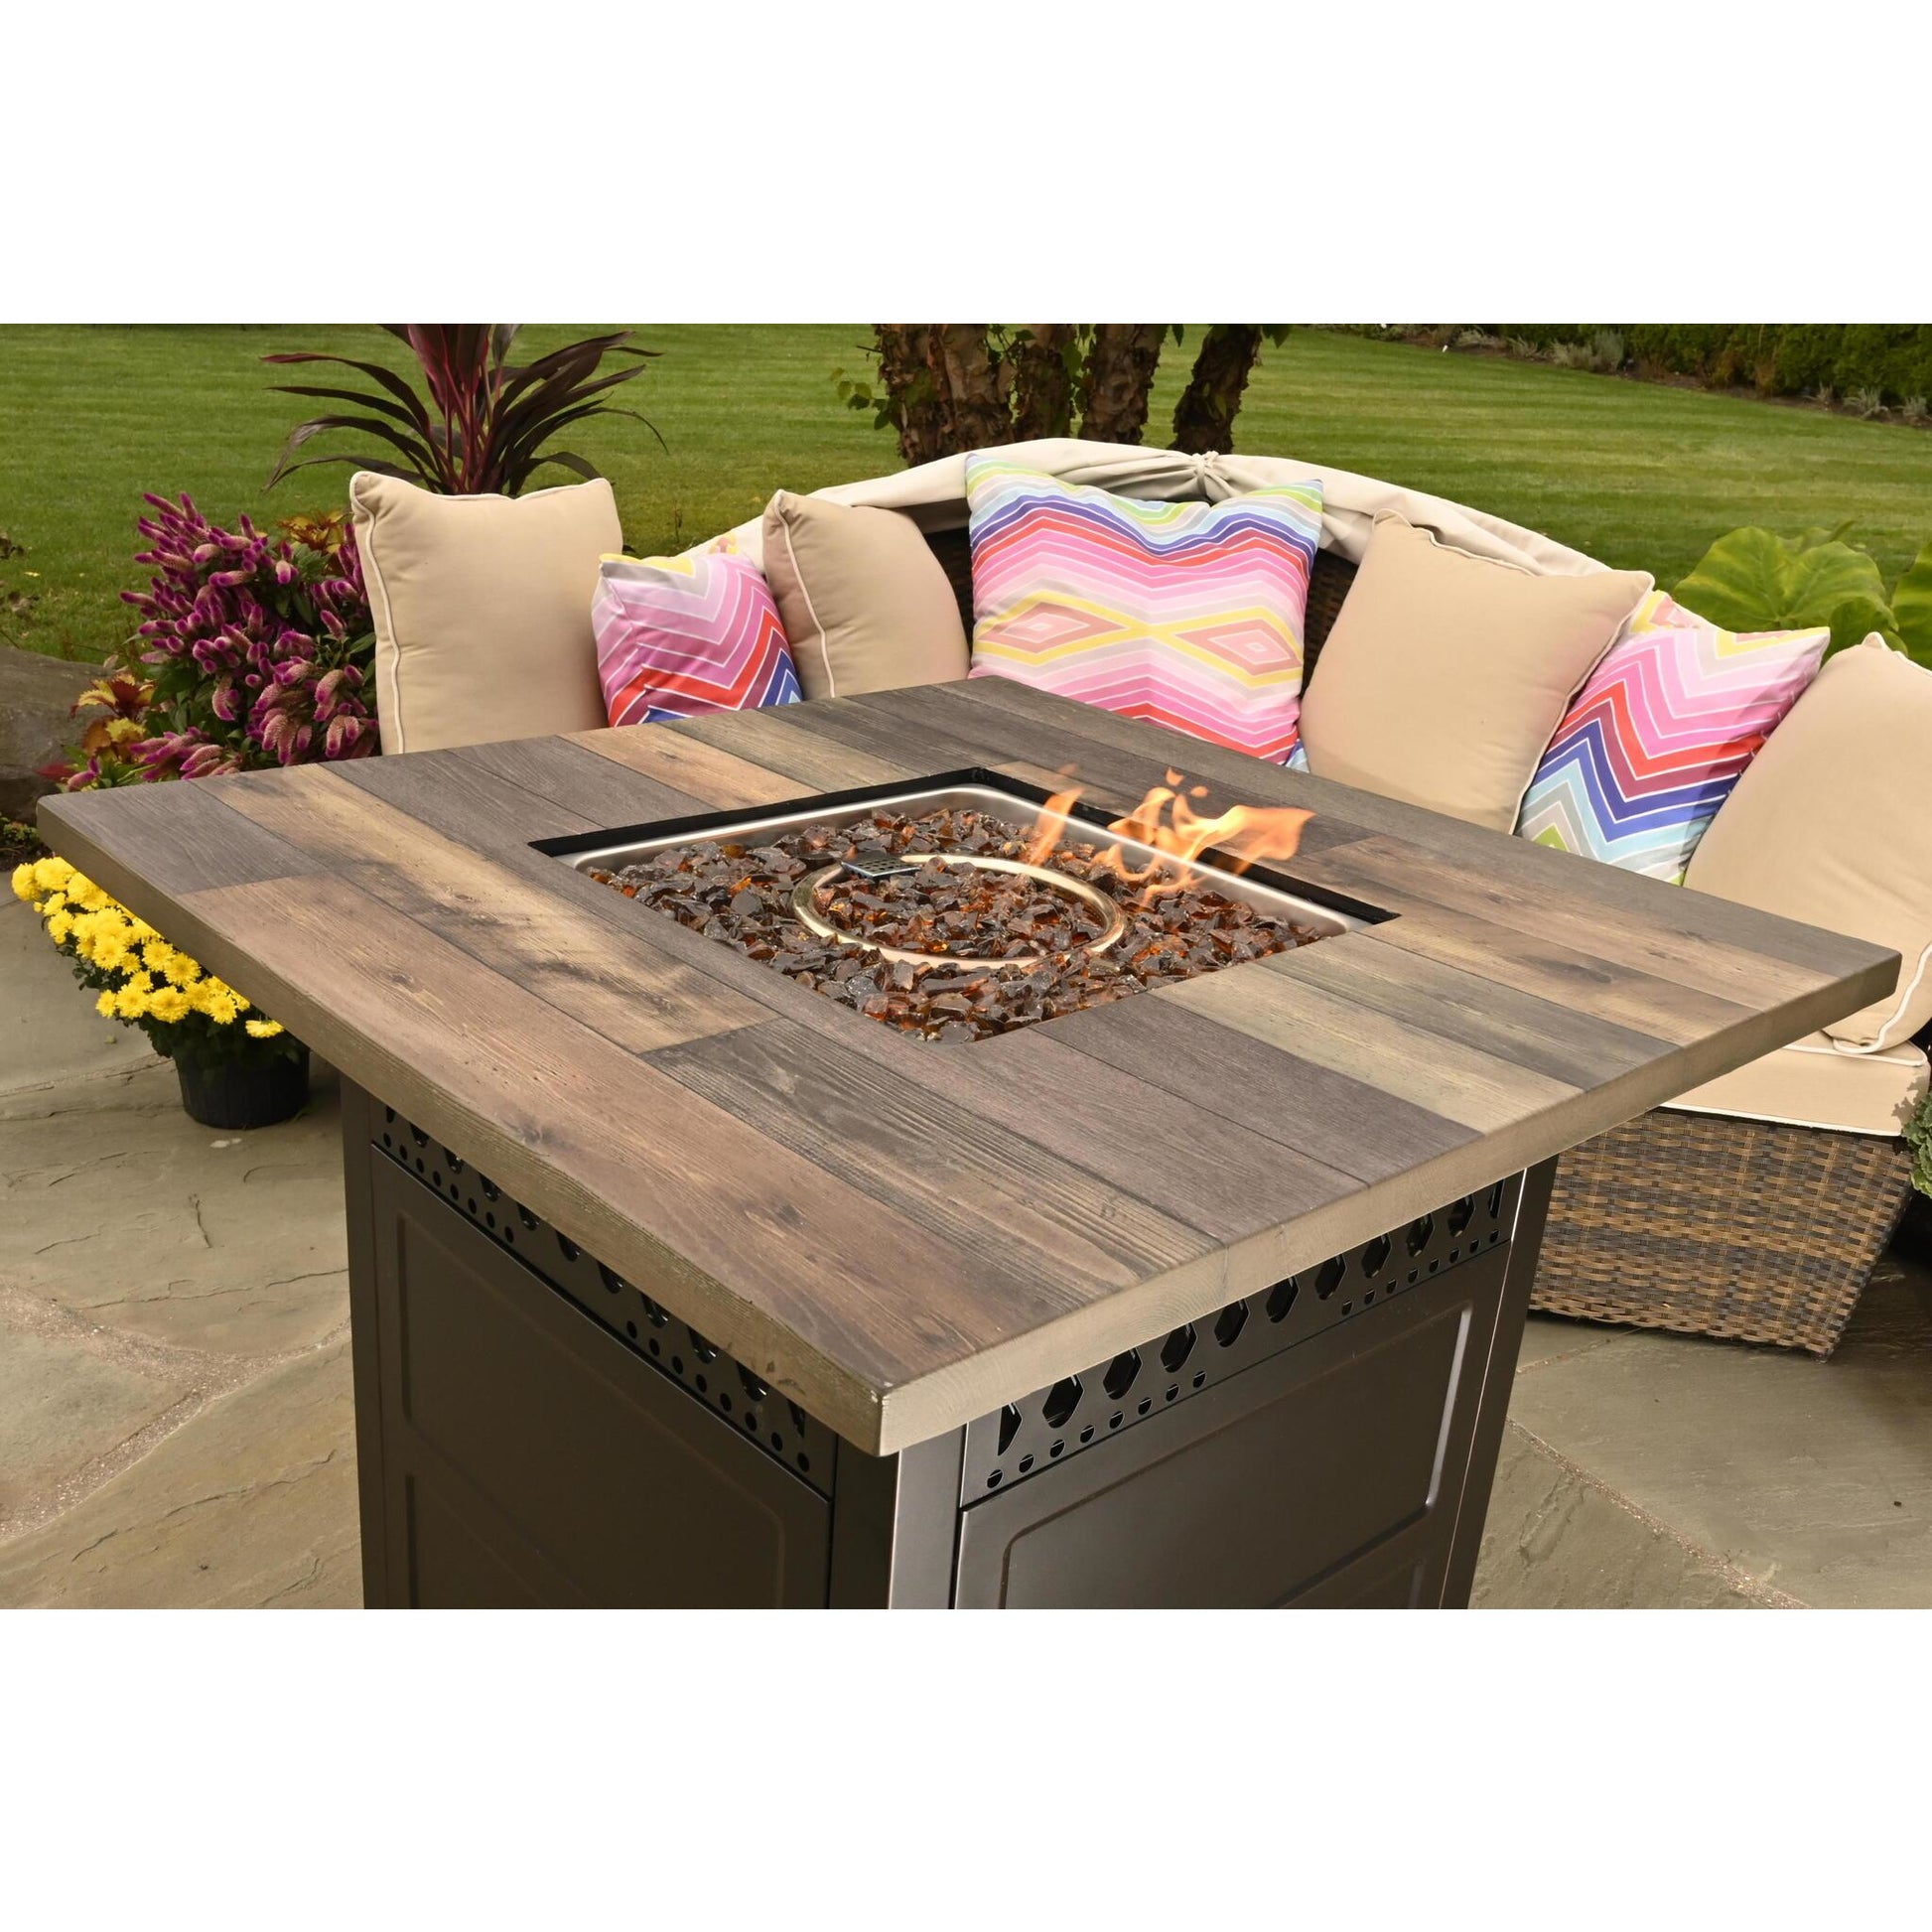 Endless Summer The Harris. Dual Heat LP Gas Outdoor Fire Pit/Patio Heater with Wood Look Resin Mantel GAD19103ES freeshipping - Luxury Tech Inc.